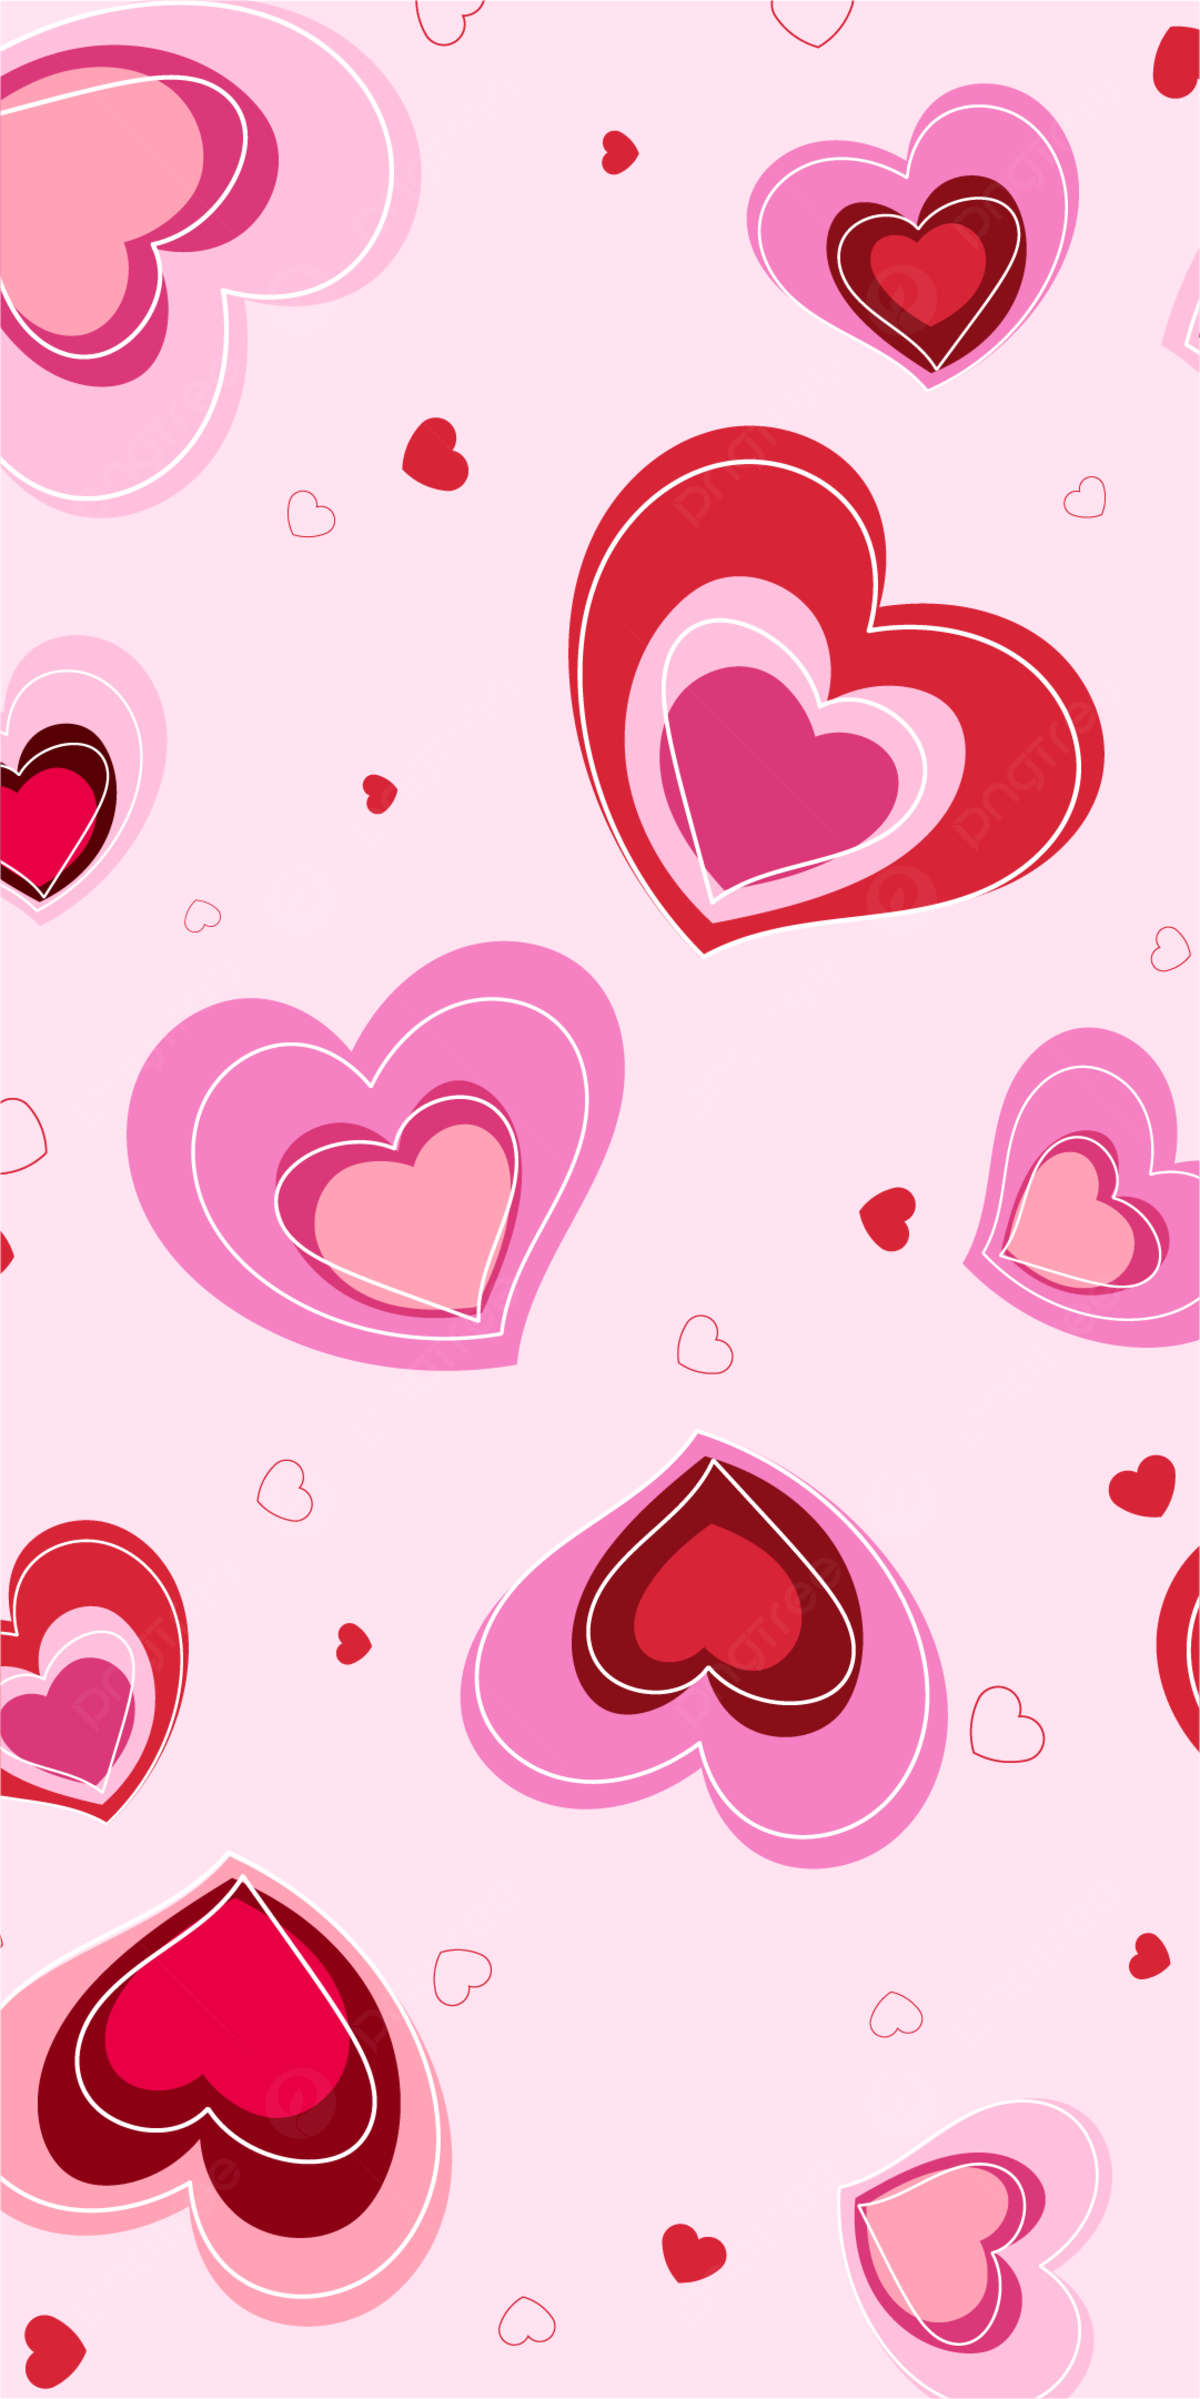 Valentines Day Lovely Hearts Wallpaper Background, Valentine S Day, Love, Cute Background Image for Free Download